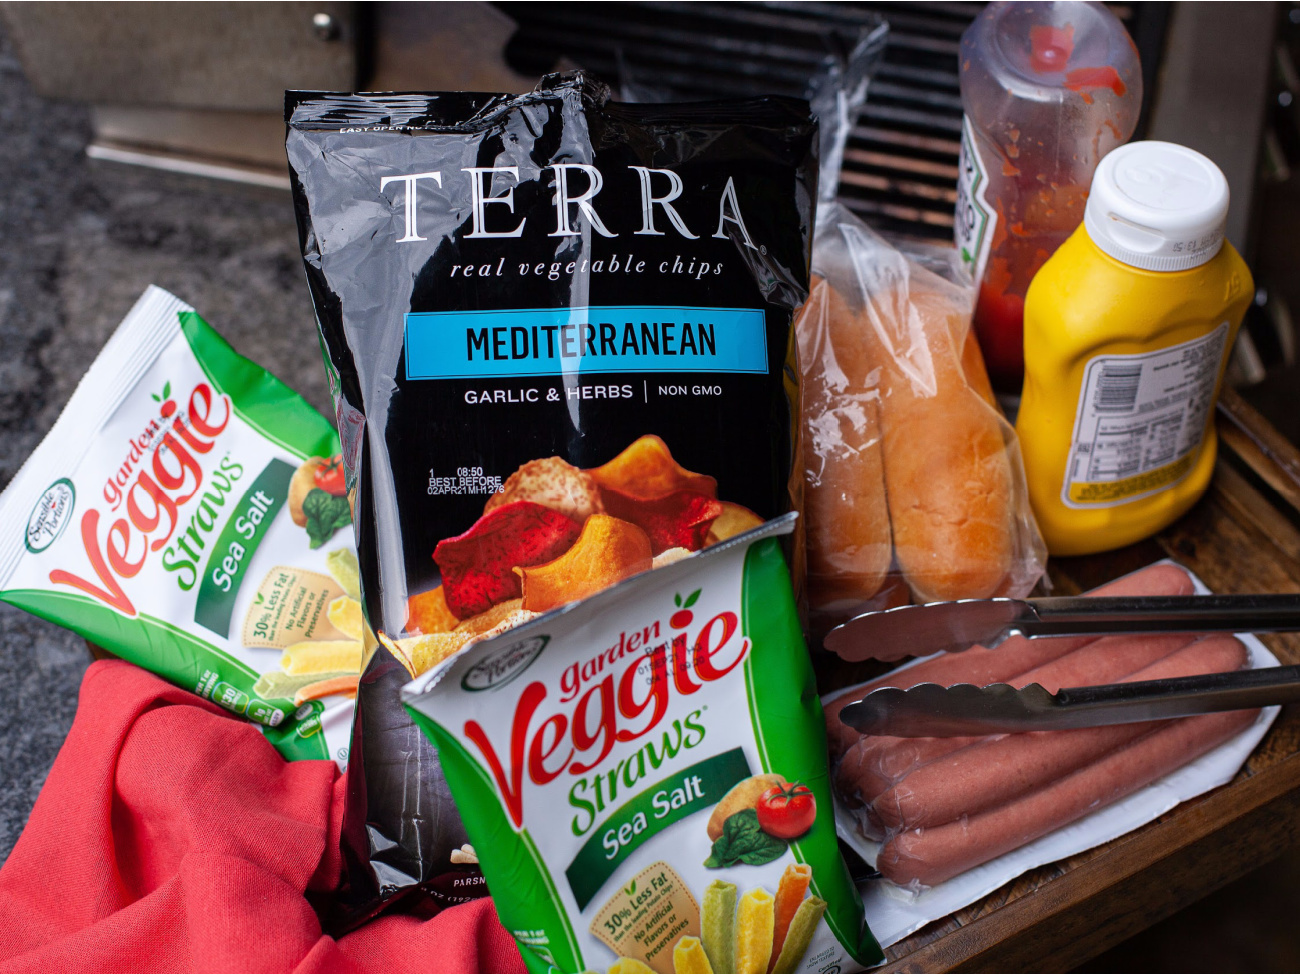 Snack Smarter & Save On Delicious Terra Chips, Garden of Eatin' Tortilla Chips and Sensible Portions Products NOW At Publix on I Heart Publix 1